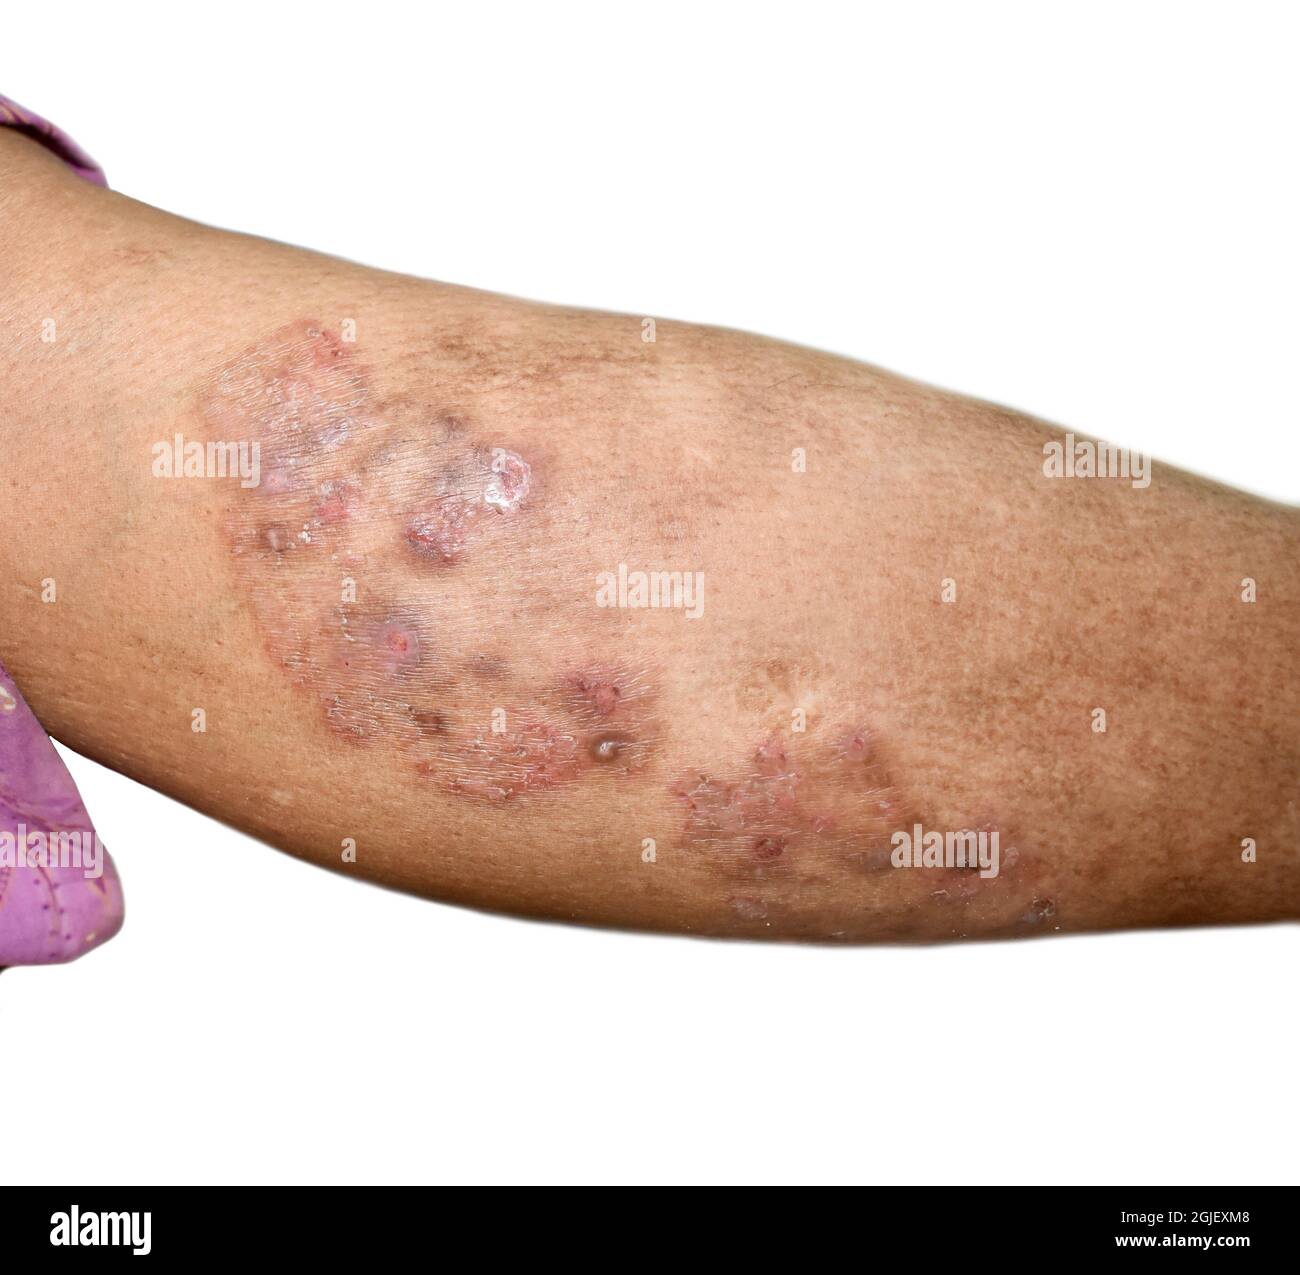 Fungal Infection Called Tinea Corporis in Leg. Widespread Ringworm Over  Knee Area Stock Photo - Image of dermatitis, lesion: 229678202